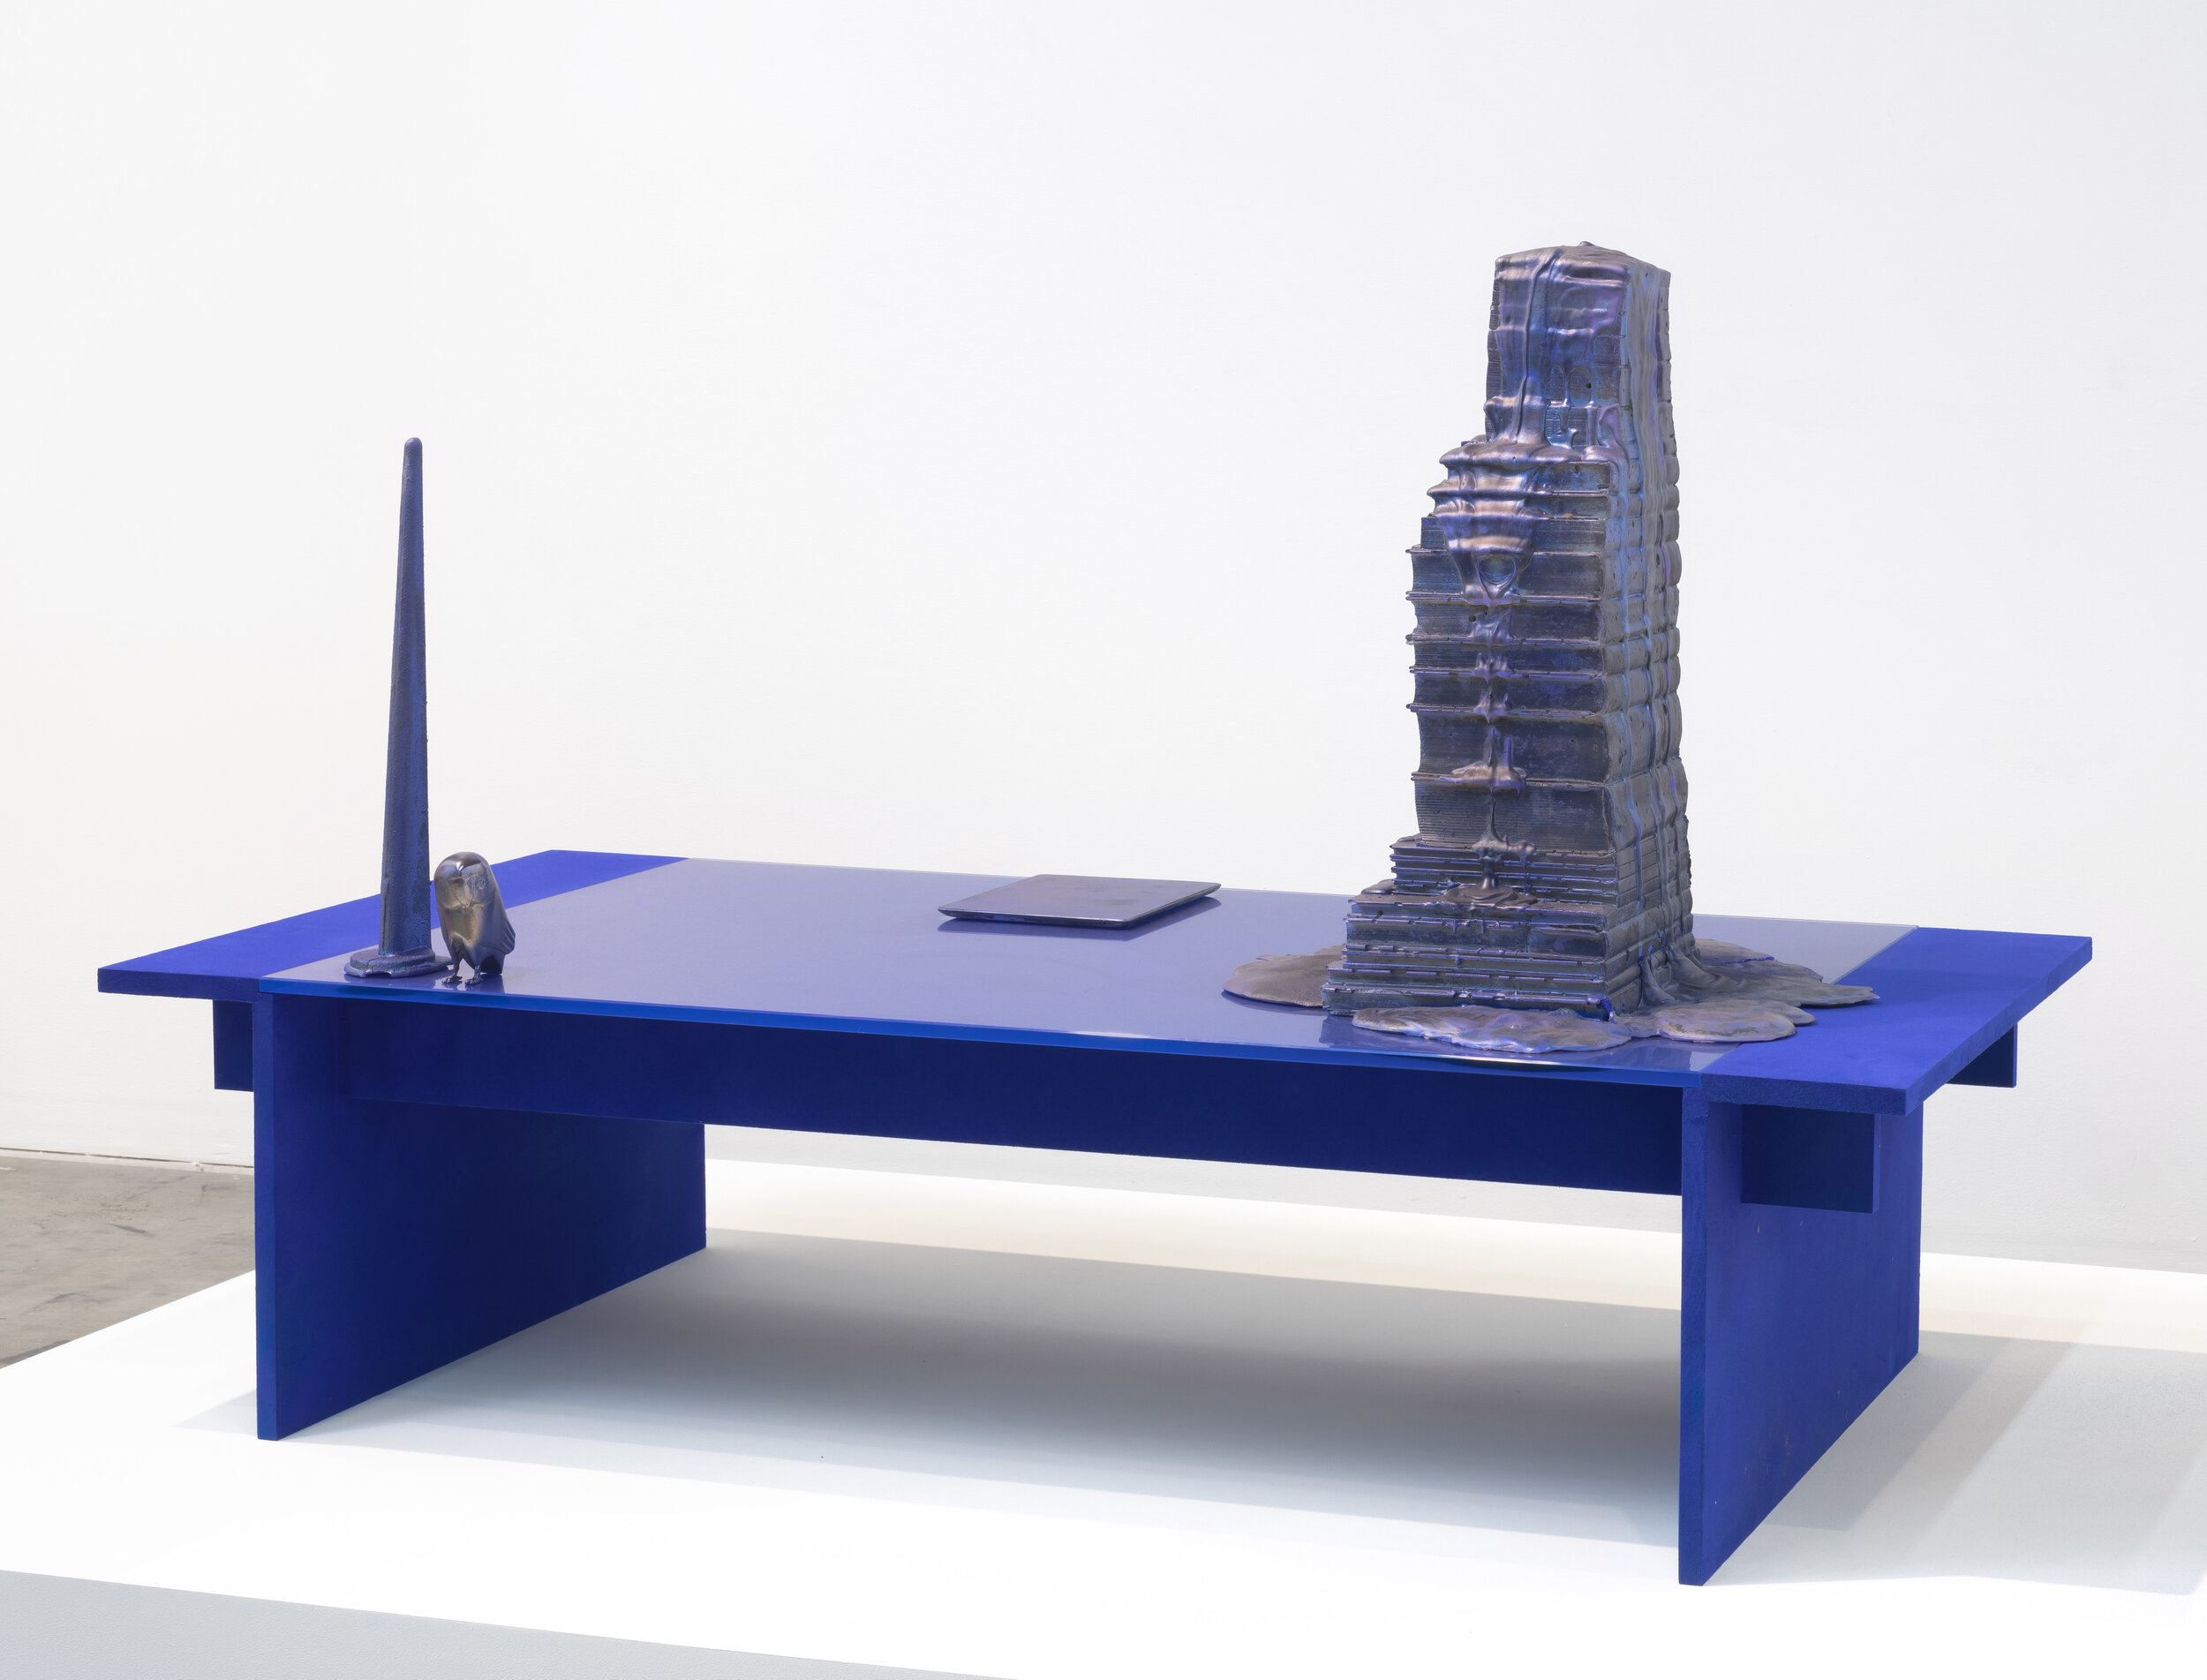   Coffee Table in Ultramarine with Objects,  2014. Wood, flocking, glass, hydrocal, and various store bought goods. 60 x 30 x 38 inches 